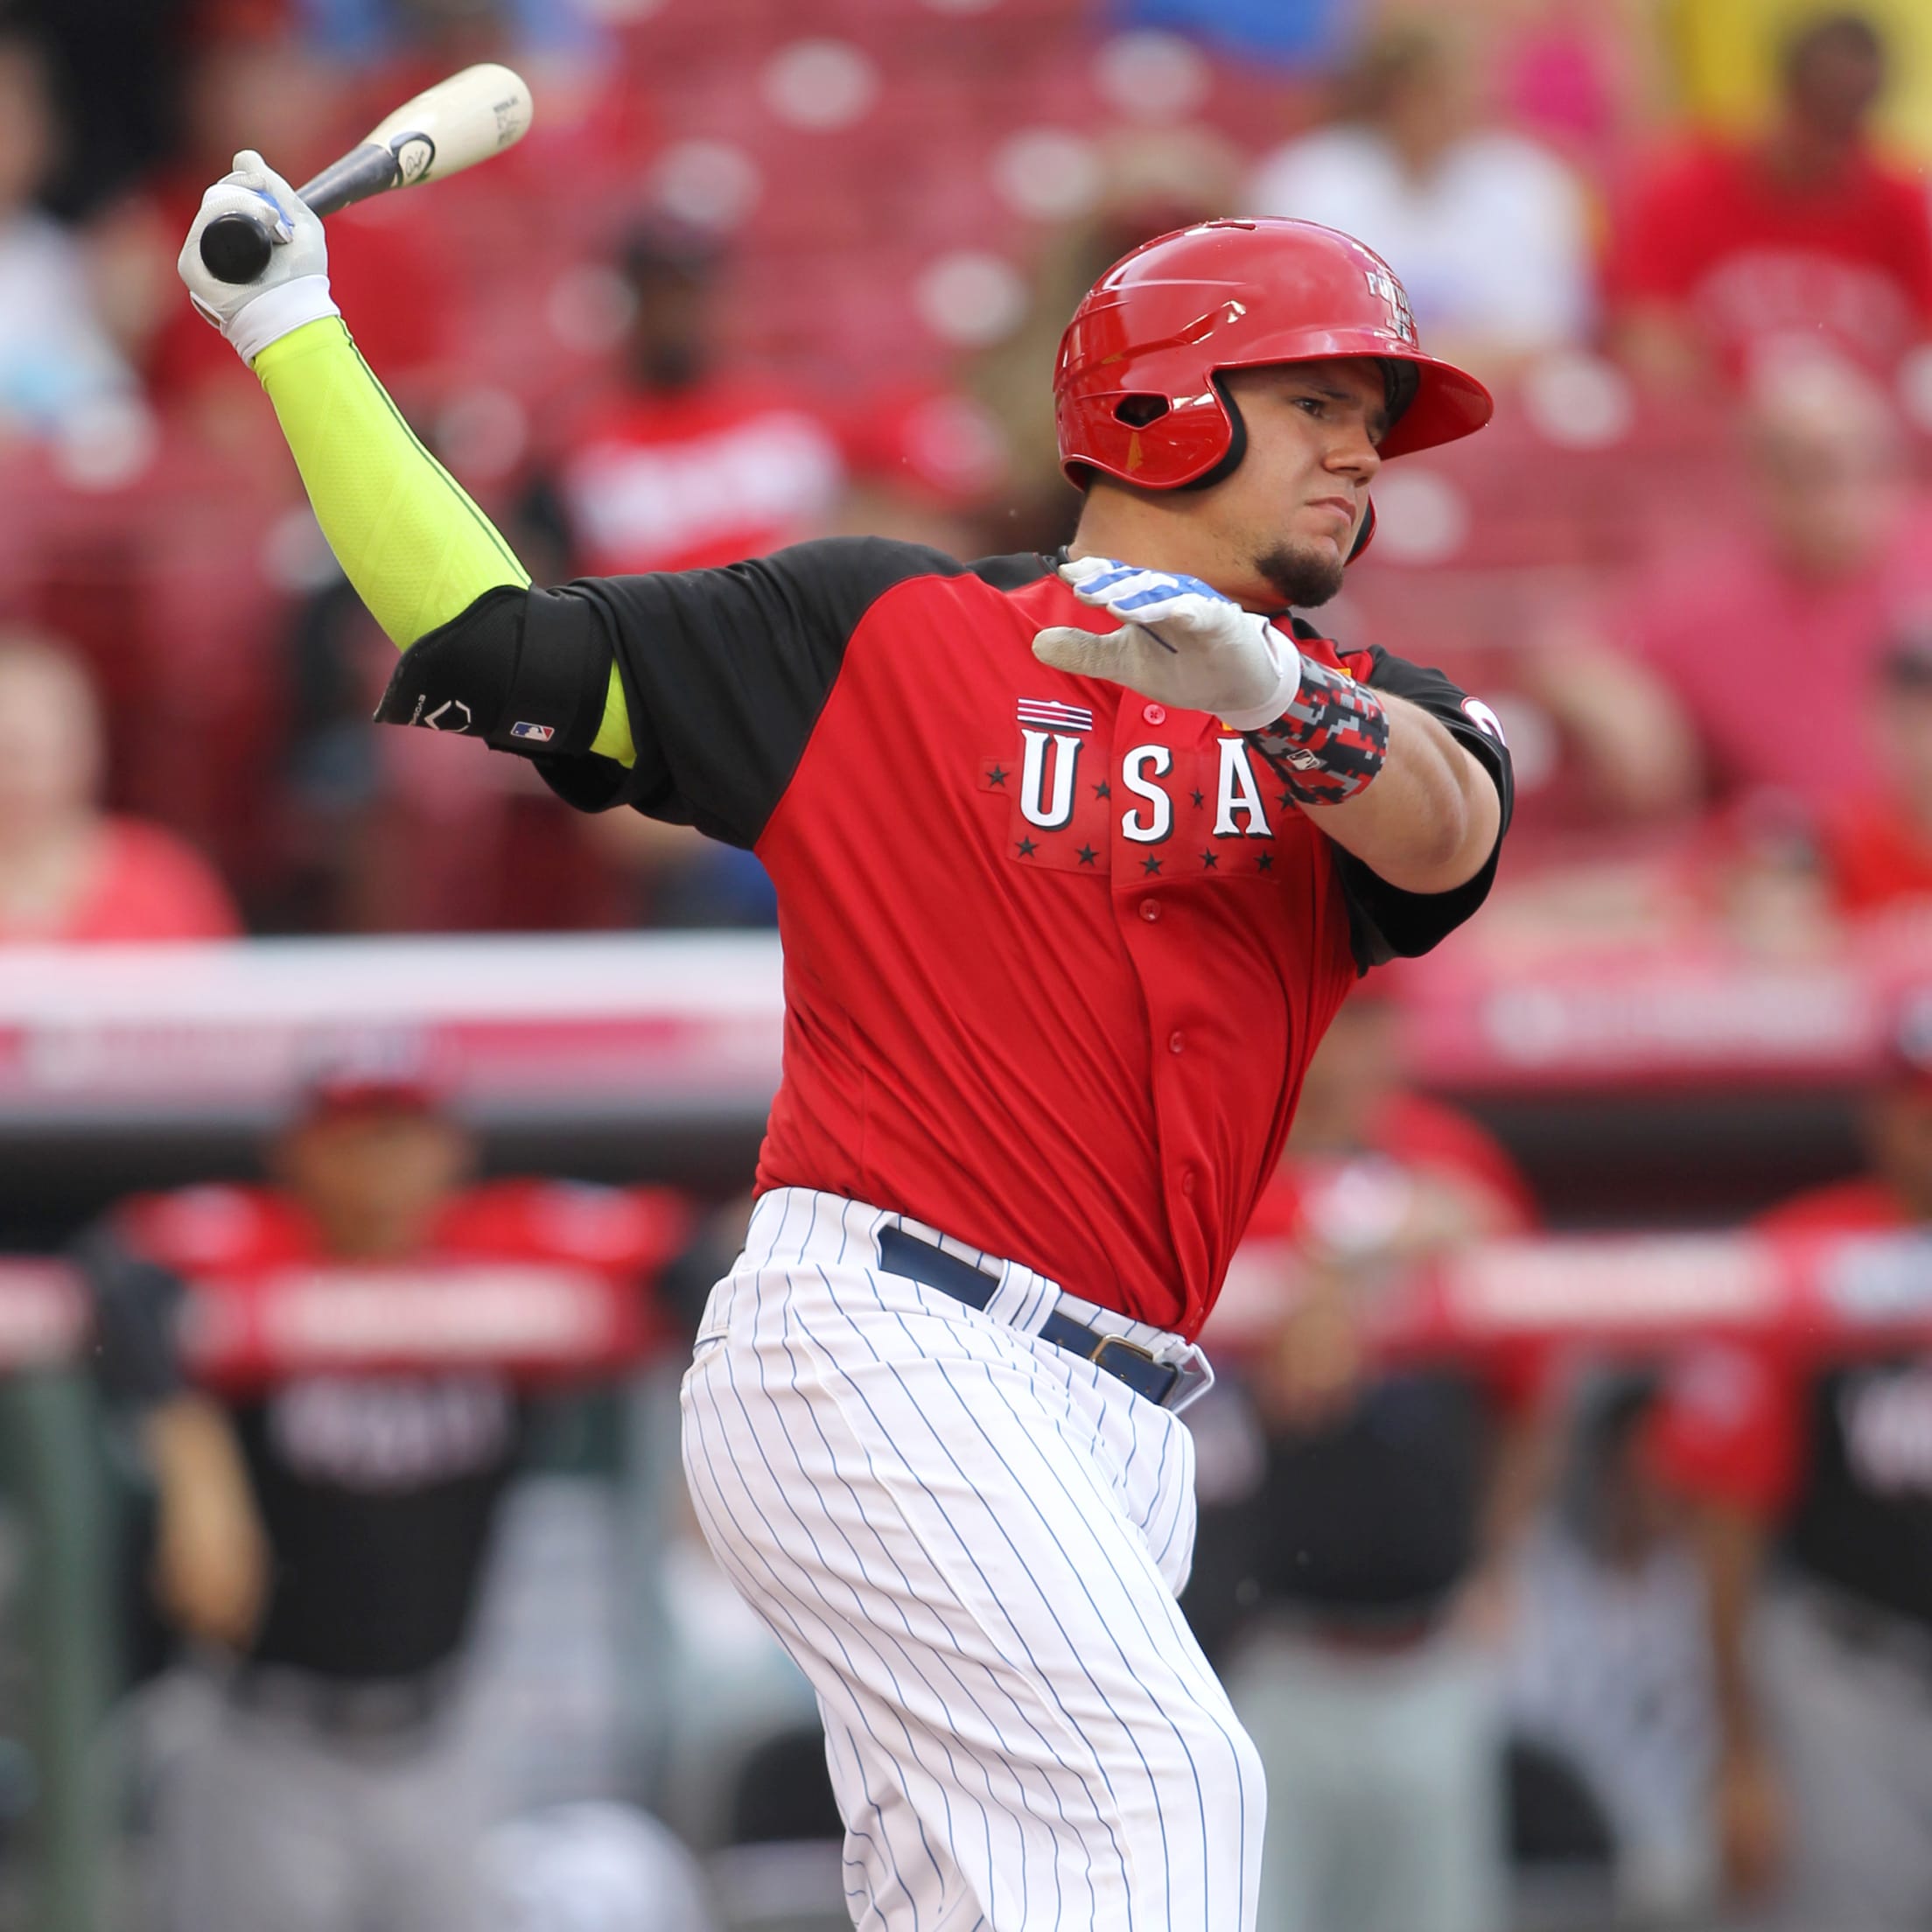 Bedford's Wiemer records RBI in MLB All-Star Futures Game